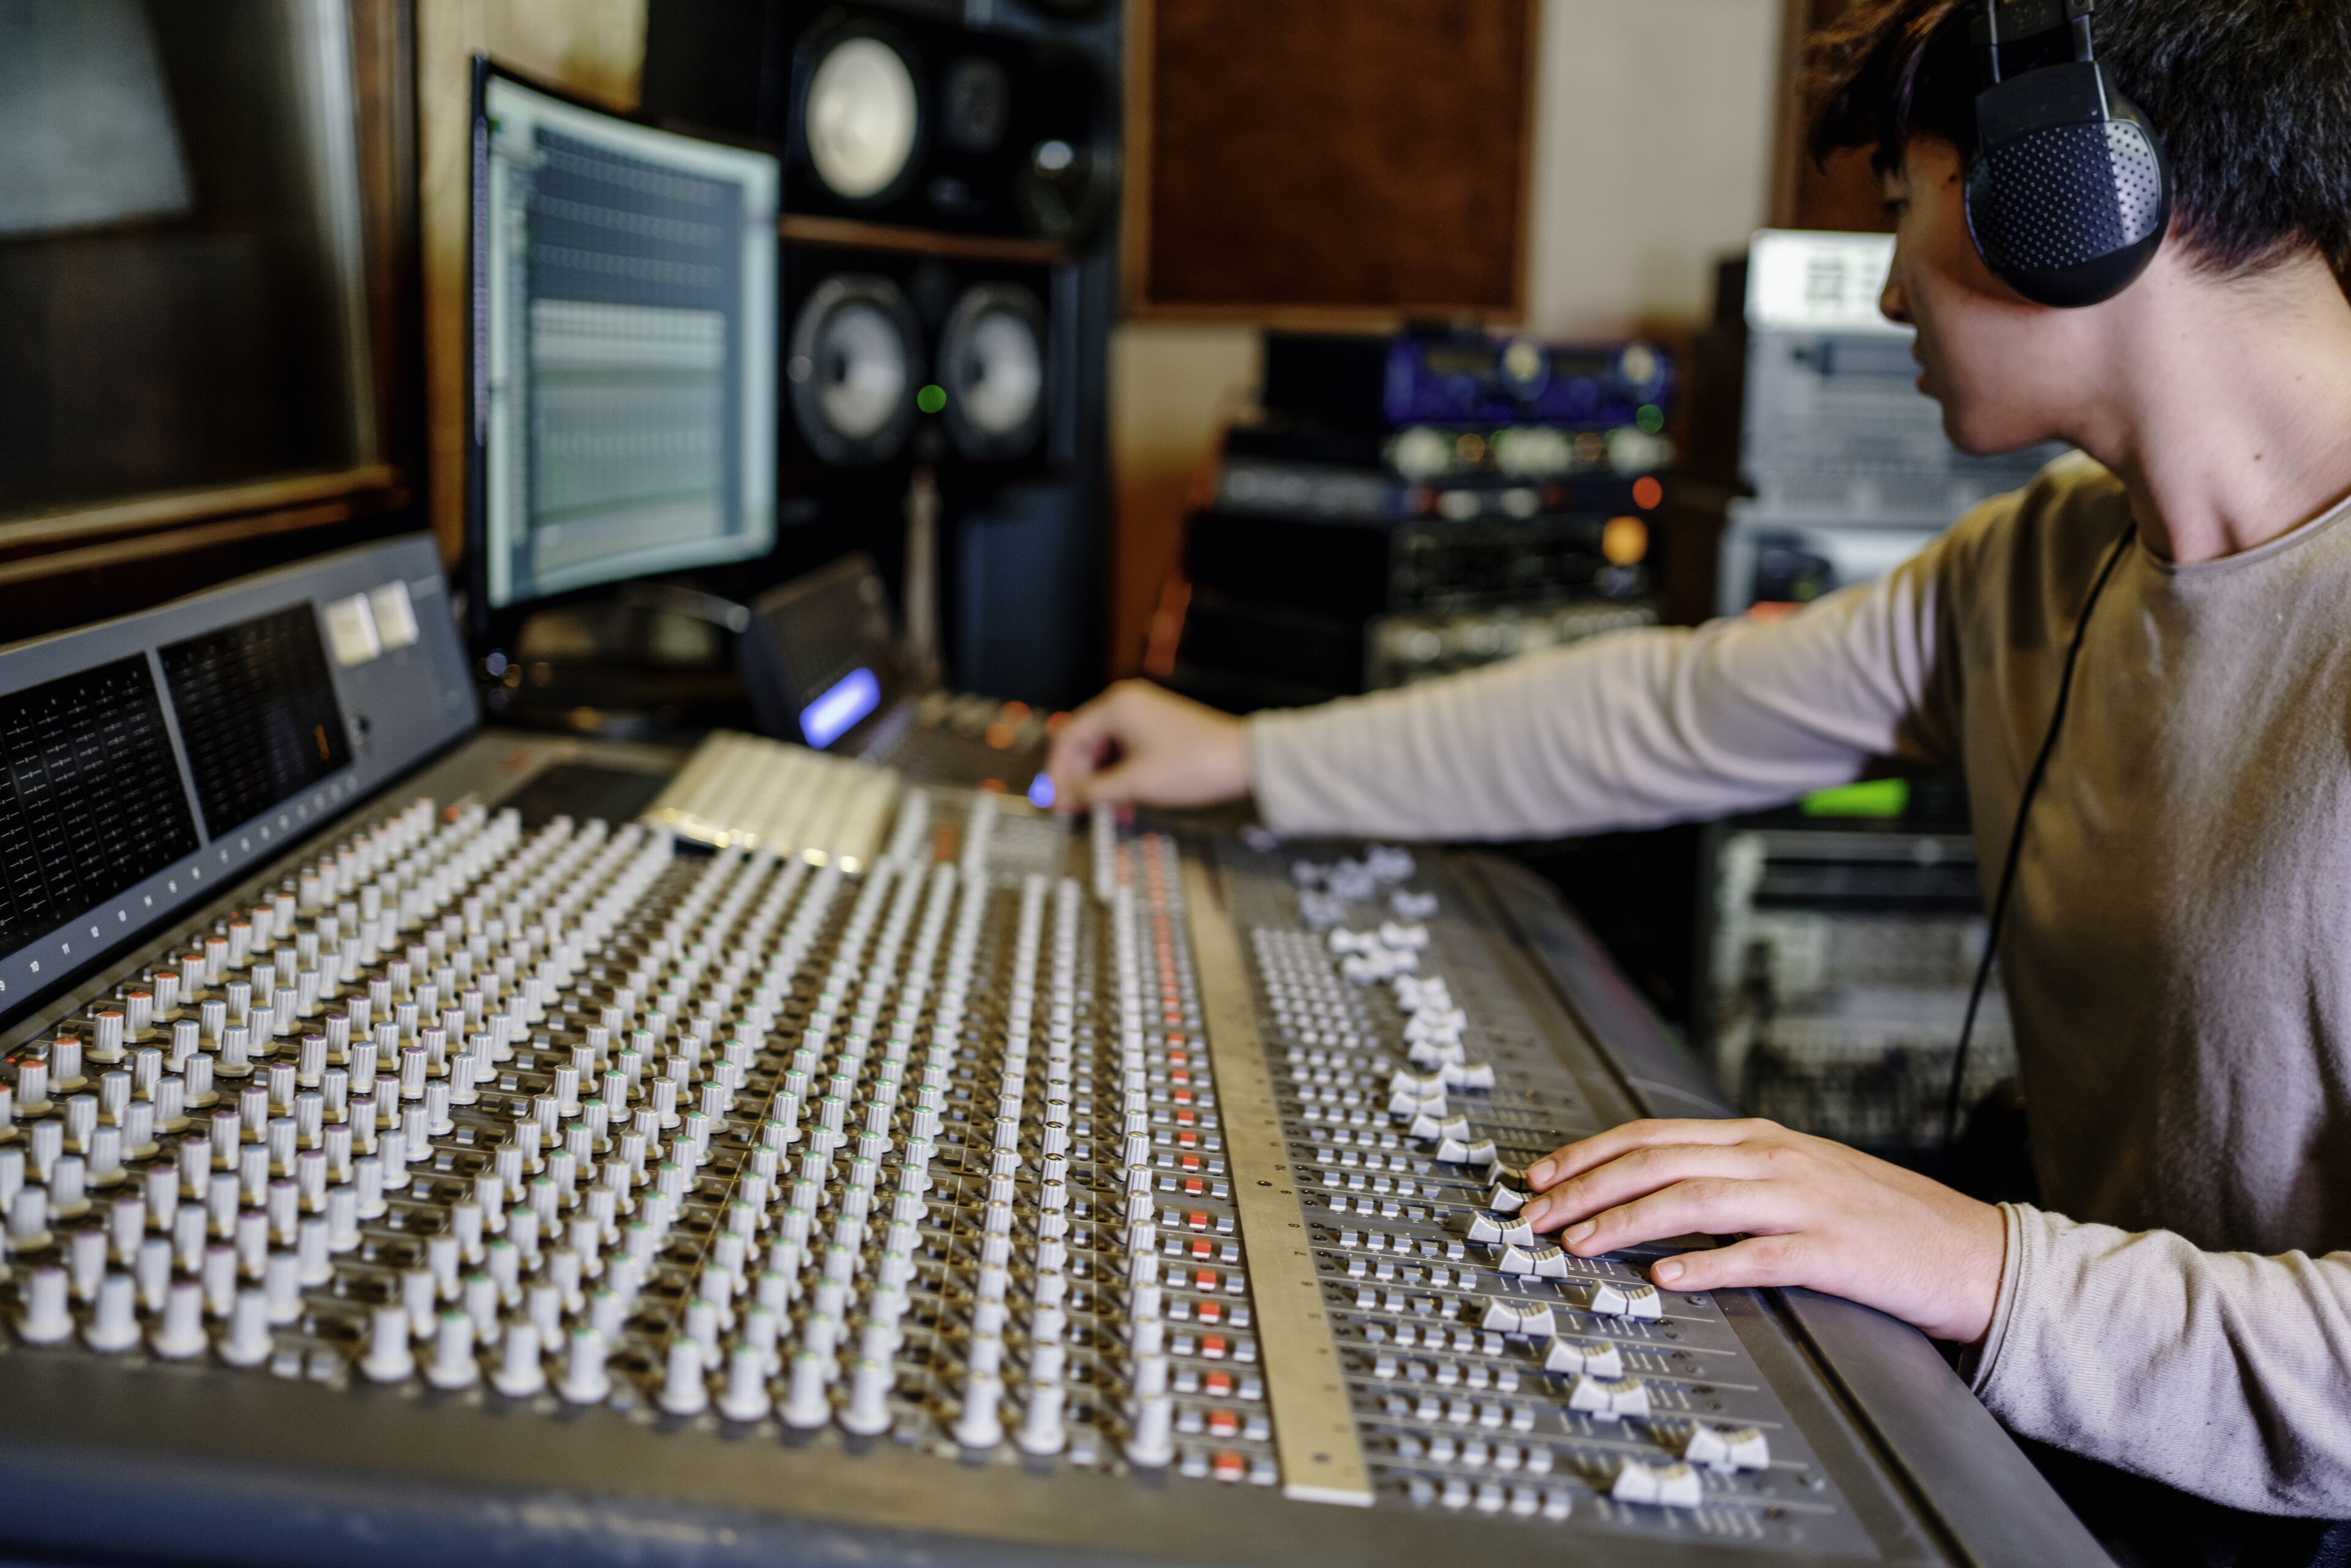 ImagePerson adjusting audio levels on a professional mixing console in a studio setting.